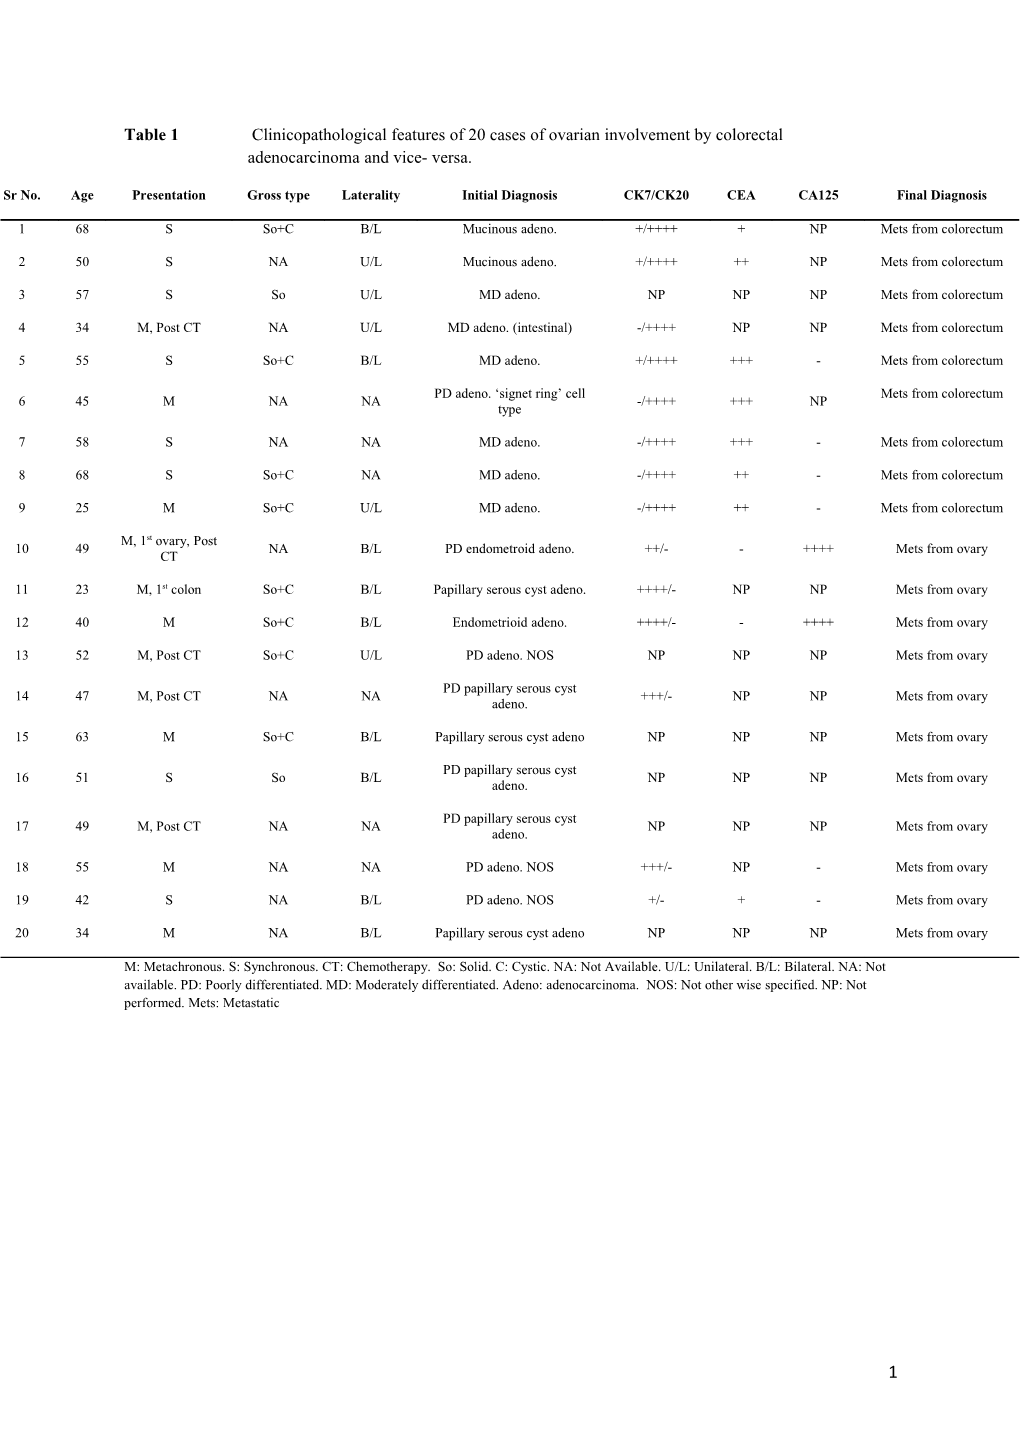 Table 1 Clinicopathological Features of 20 Cases of Ovarian Involvement by Colorectal